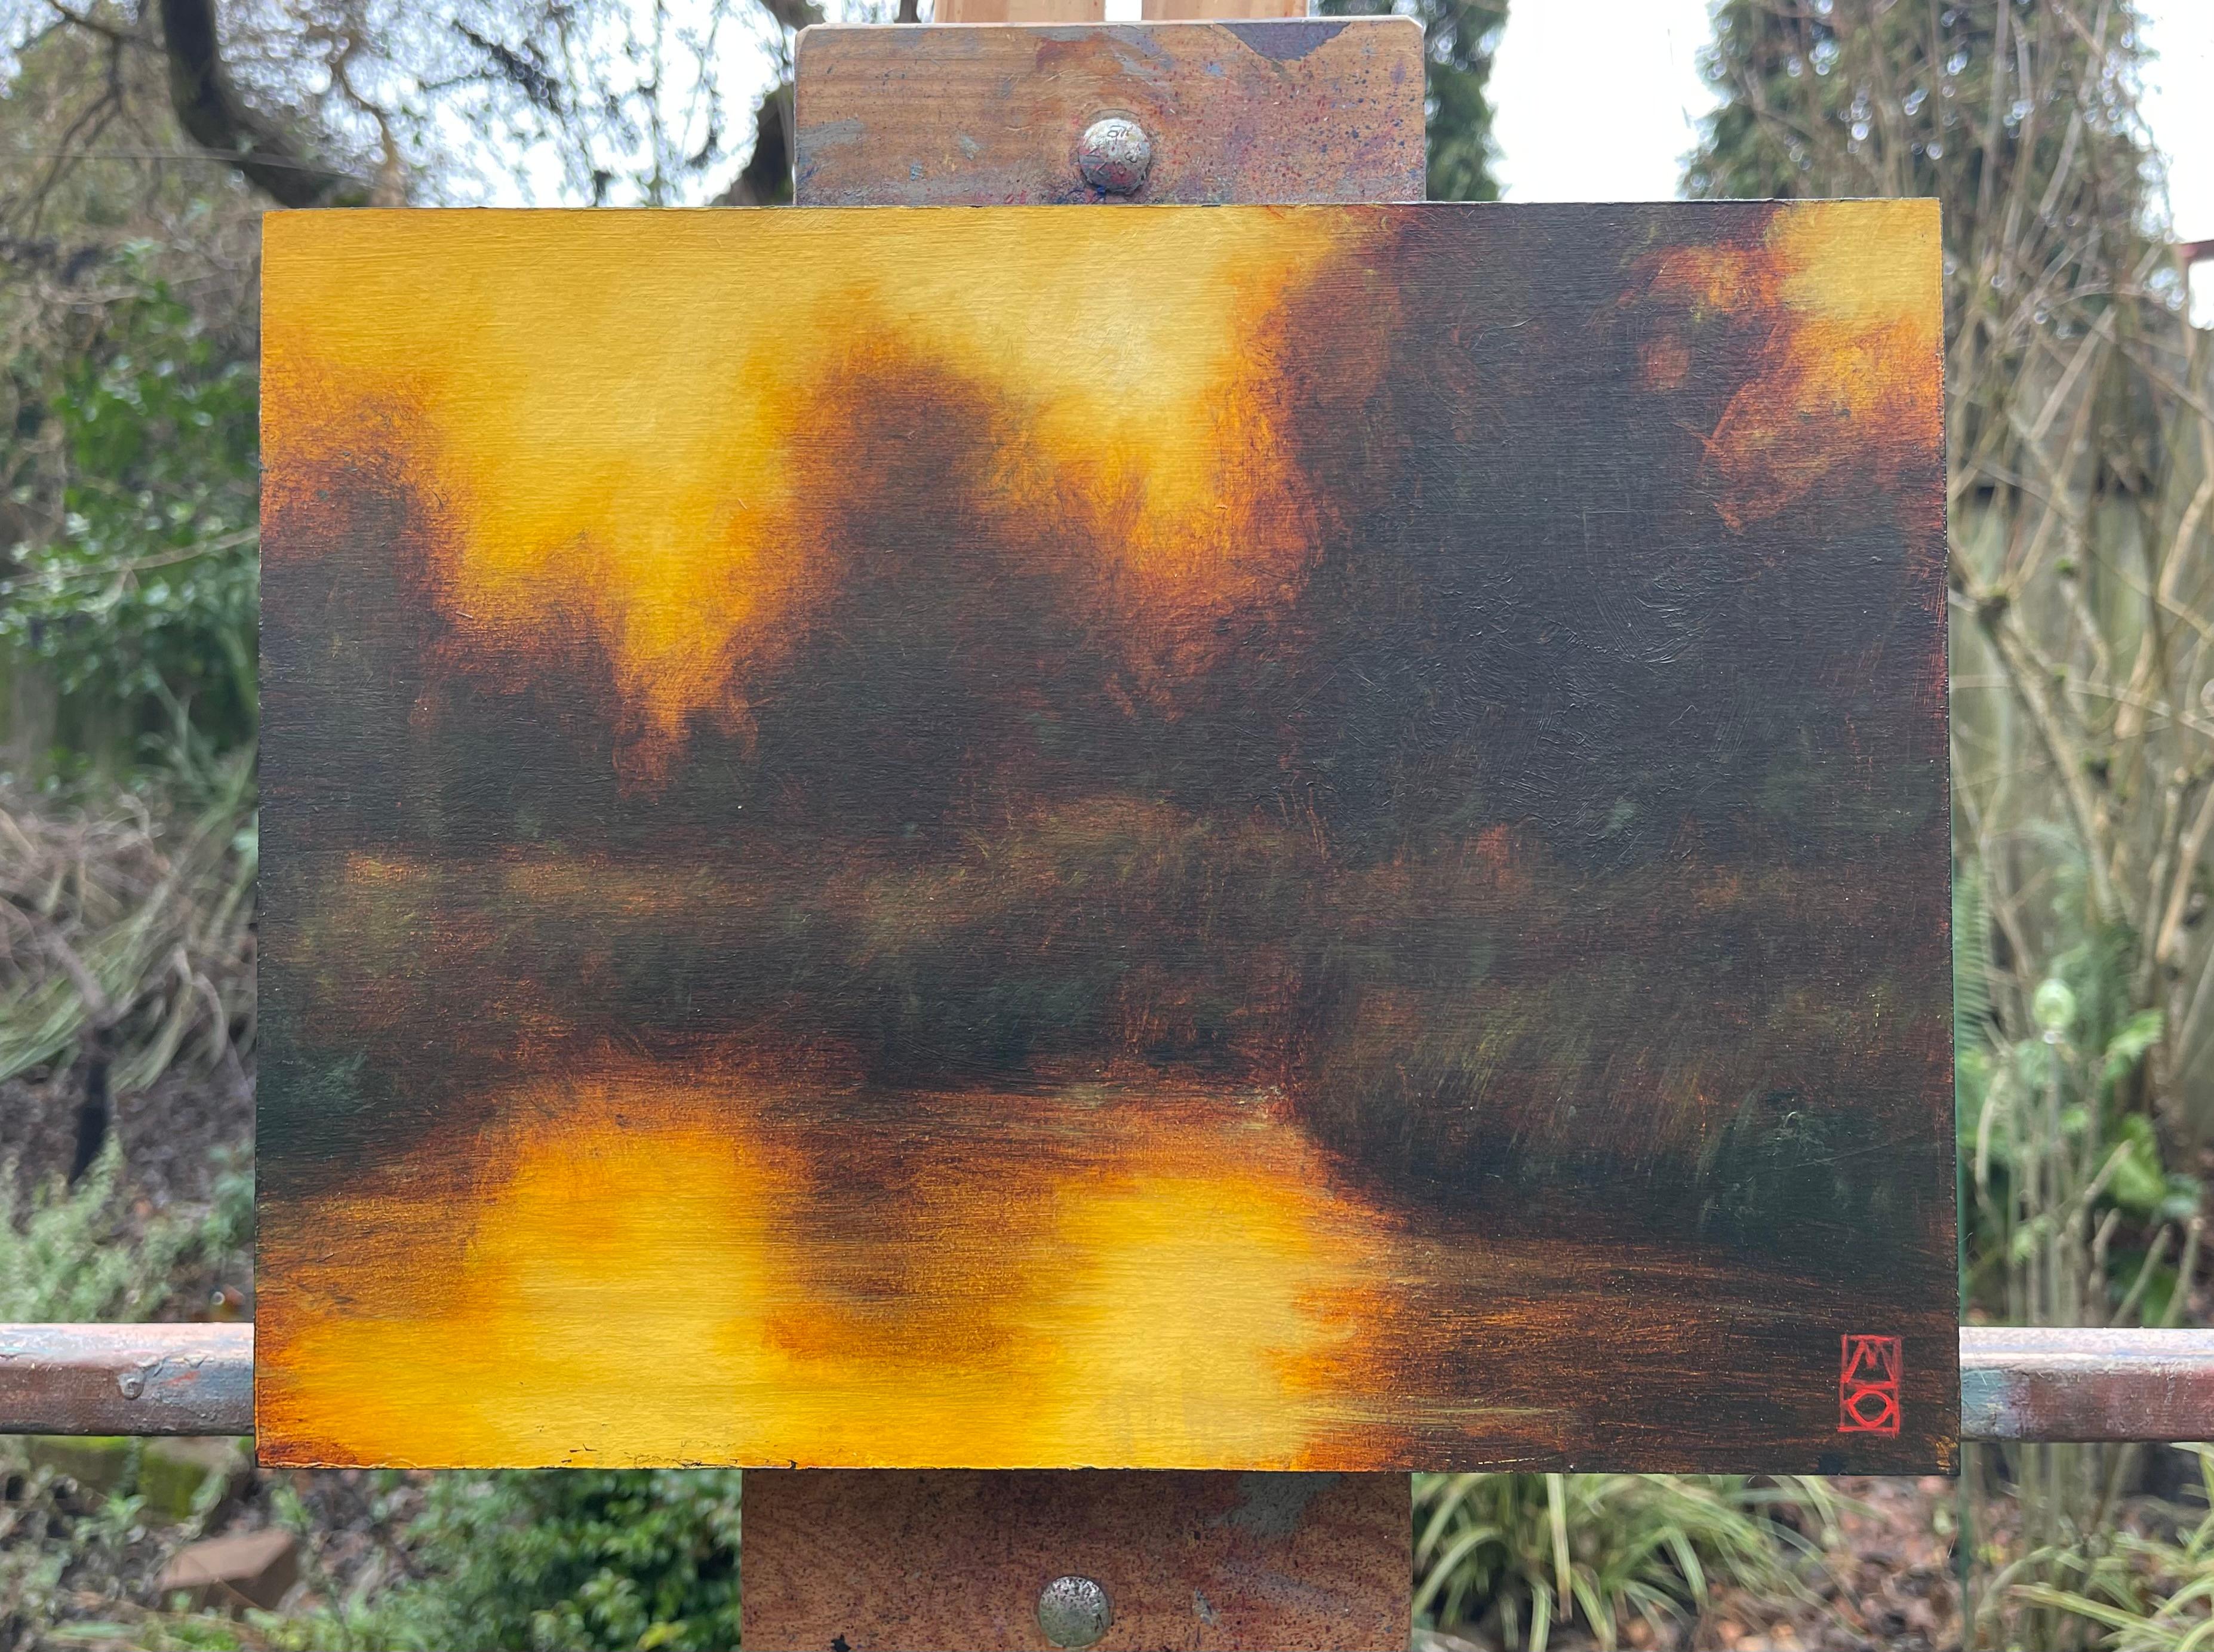 <p>Artist Comments<br>Artist Michael Orwick presents a tonalist oil painting on a birch panel depicting a beautiful landscape. A group of trees creates mesmerizing reflections in the still water below them. As the warm light sets in the background,